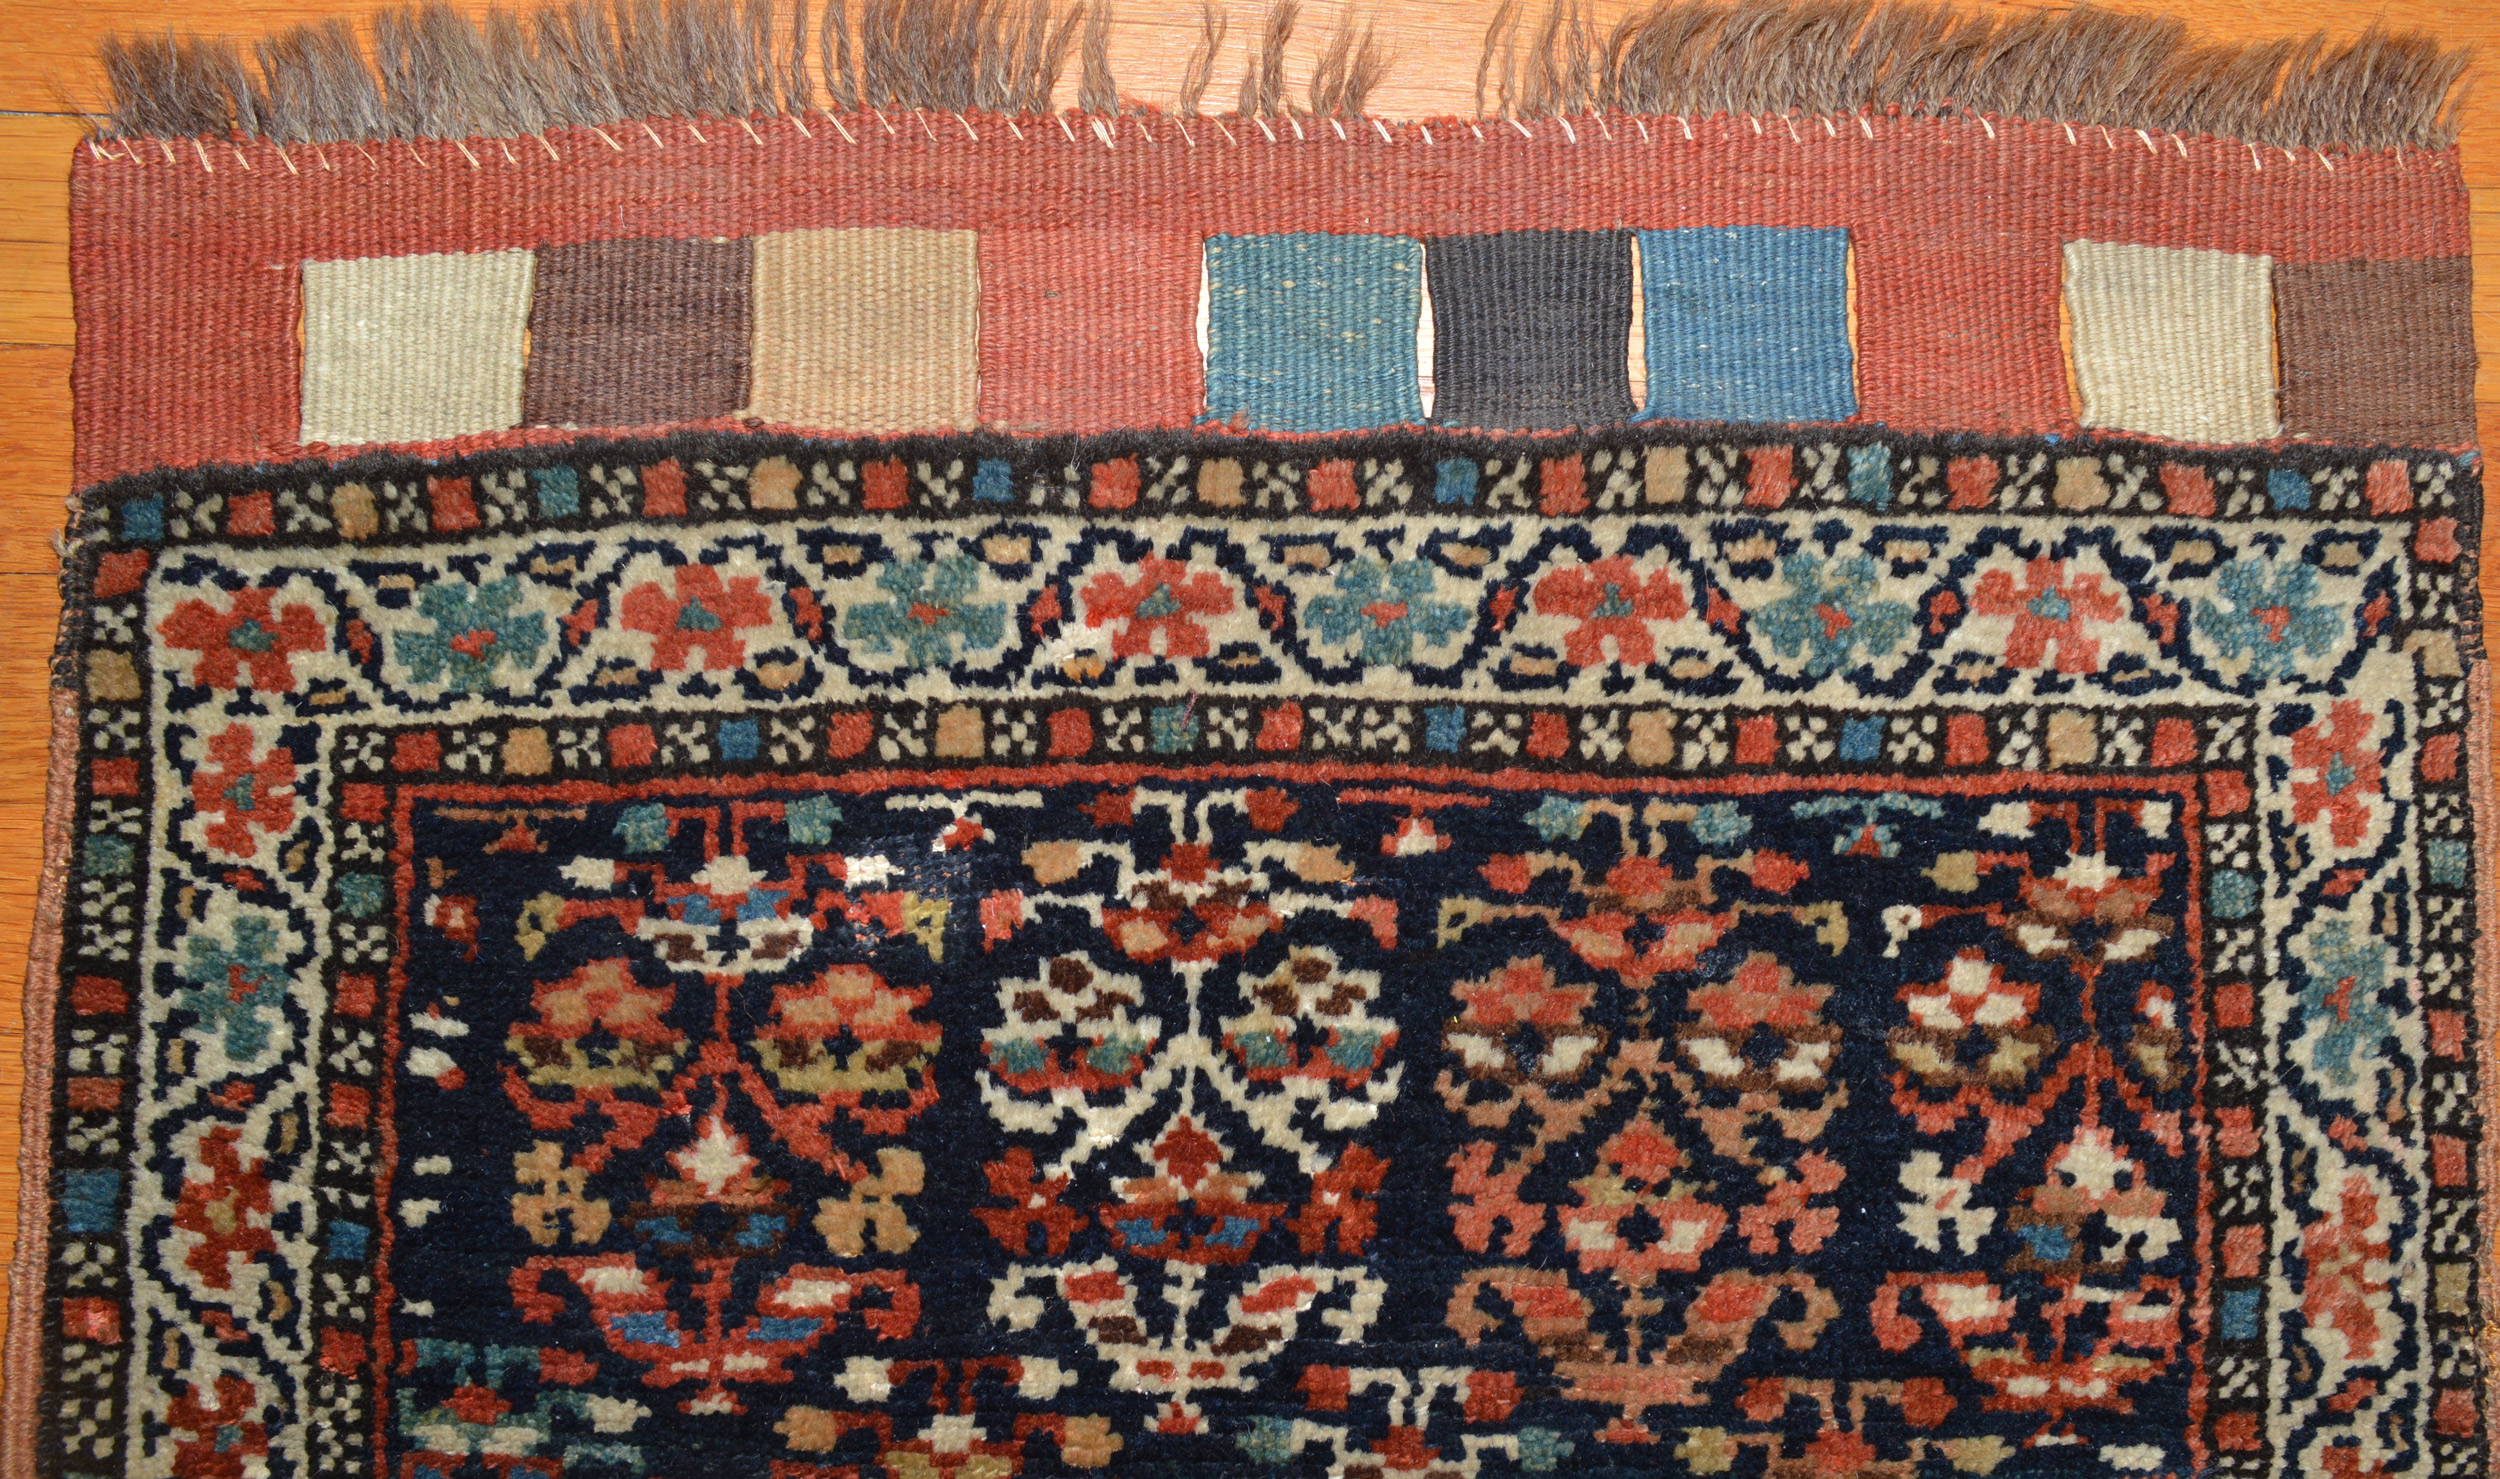 Field detail and flat woven kilim closure tabs from an antique Shah Savan or Kurdish bag face. Douglas Stock Gallery, antique collectible rugs and antique Oriental bags and saddle bags, antique rugs Boston,MA area New England